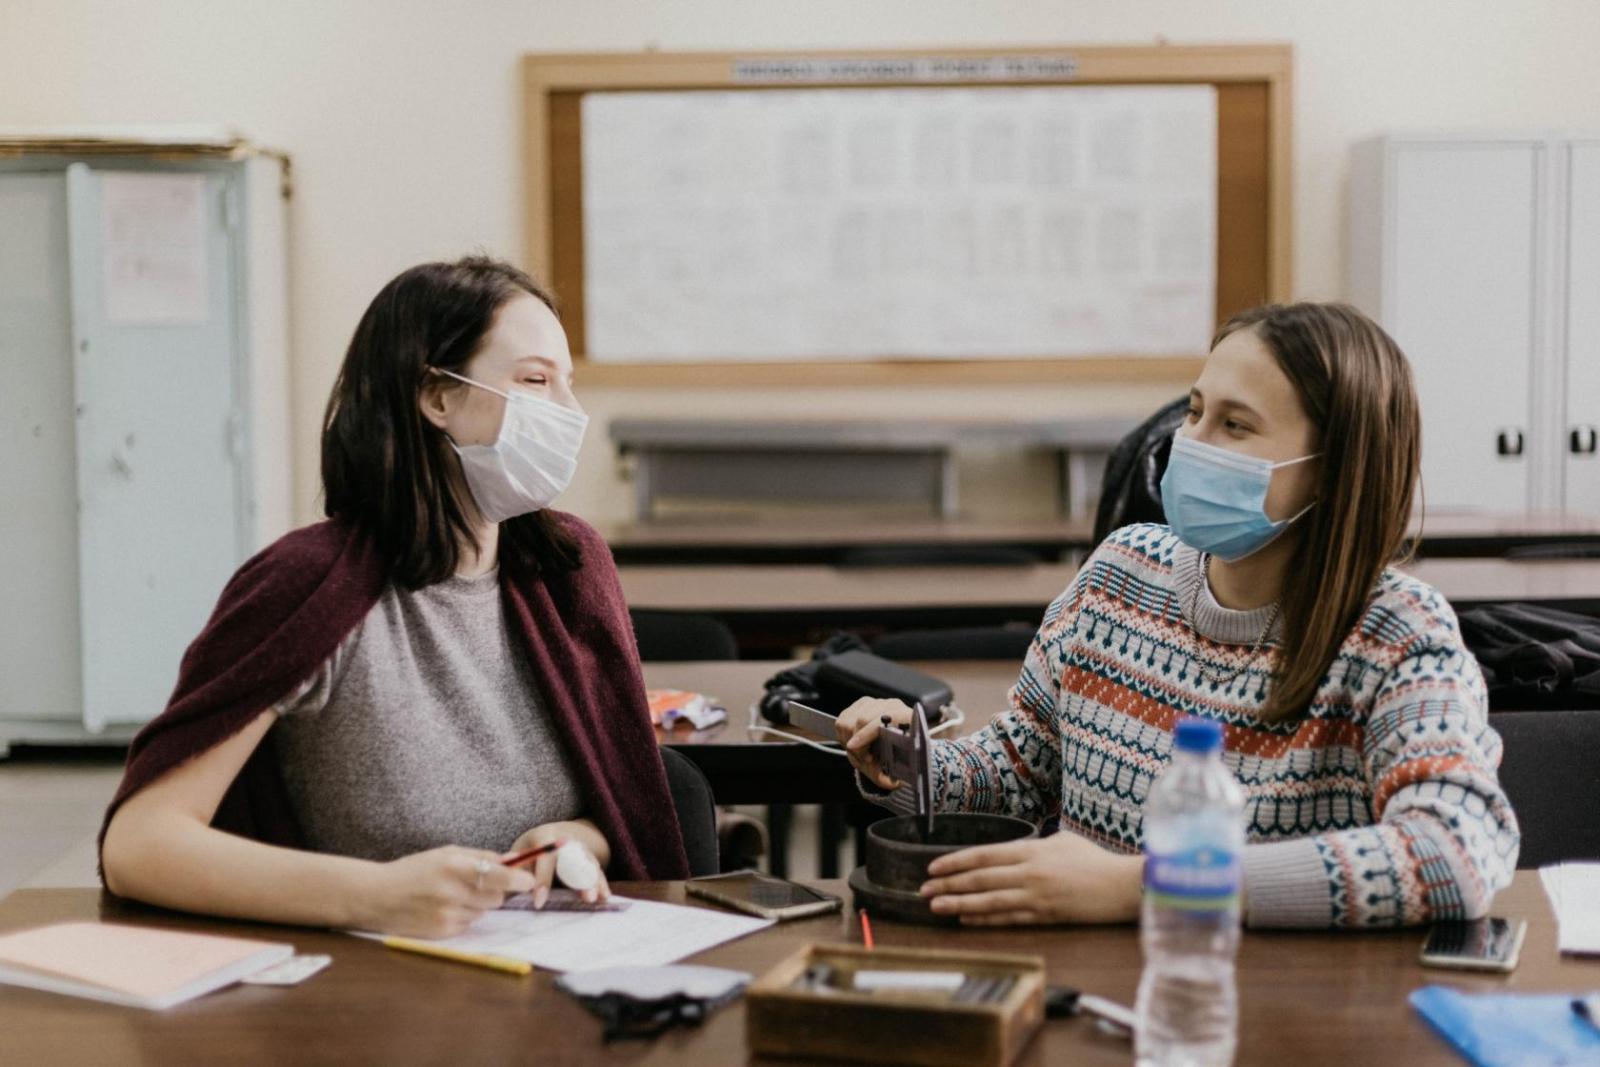 Two teenagers wearing face masks chat in a classroom